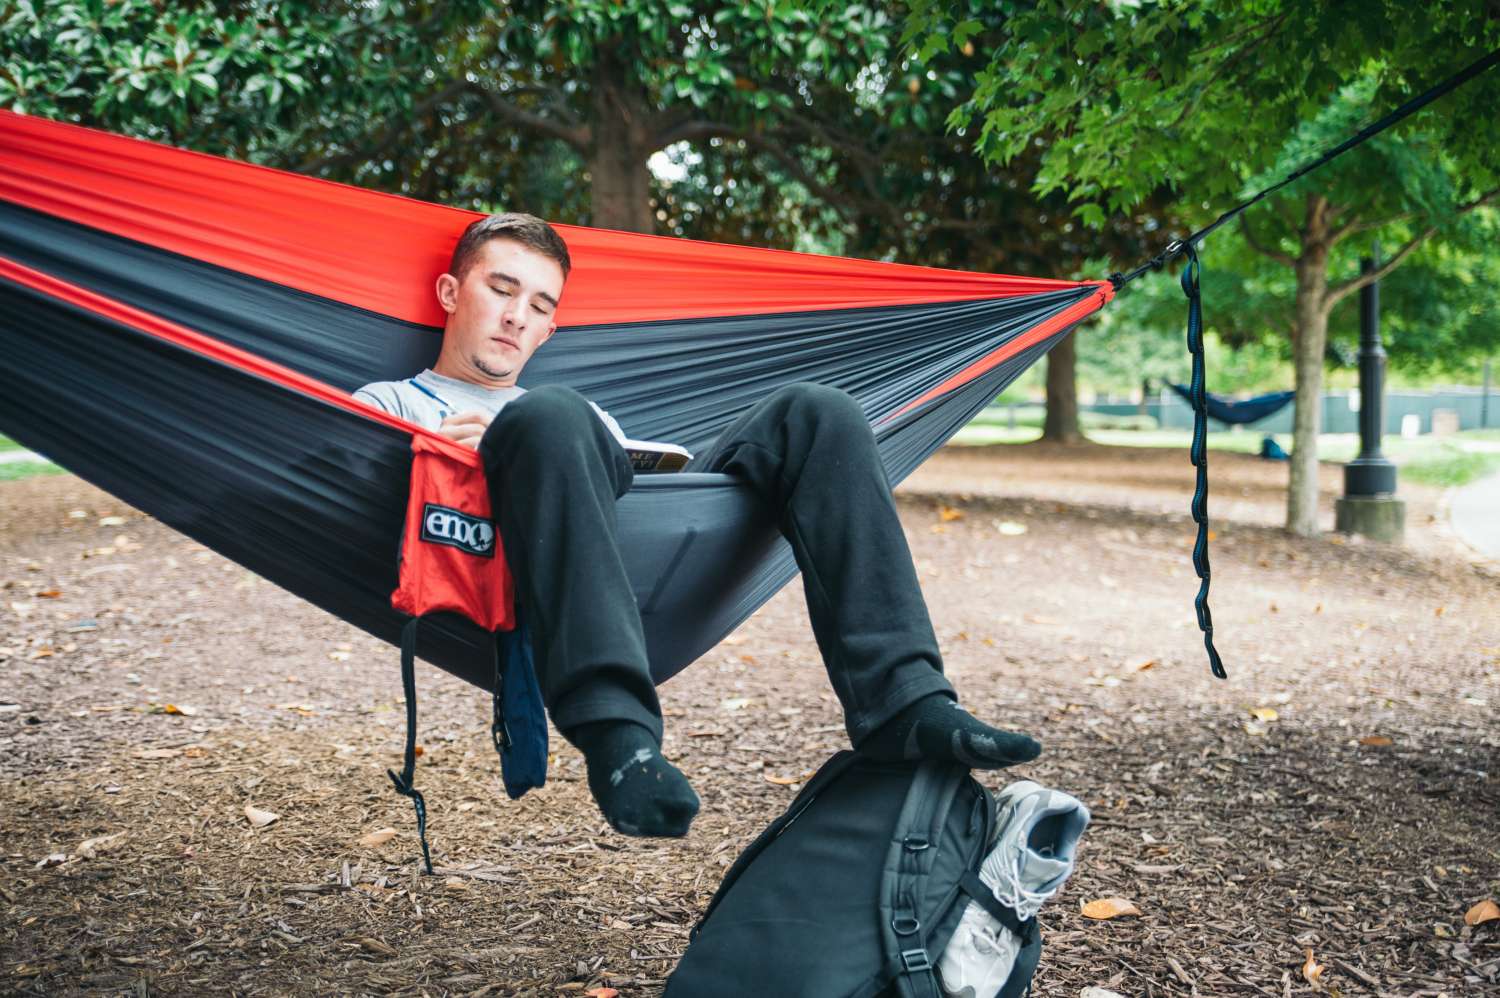 Freshman’s guide to outdoor campus relaxation